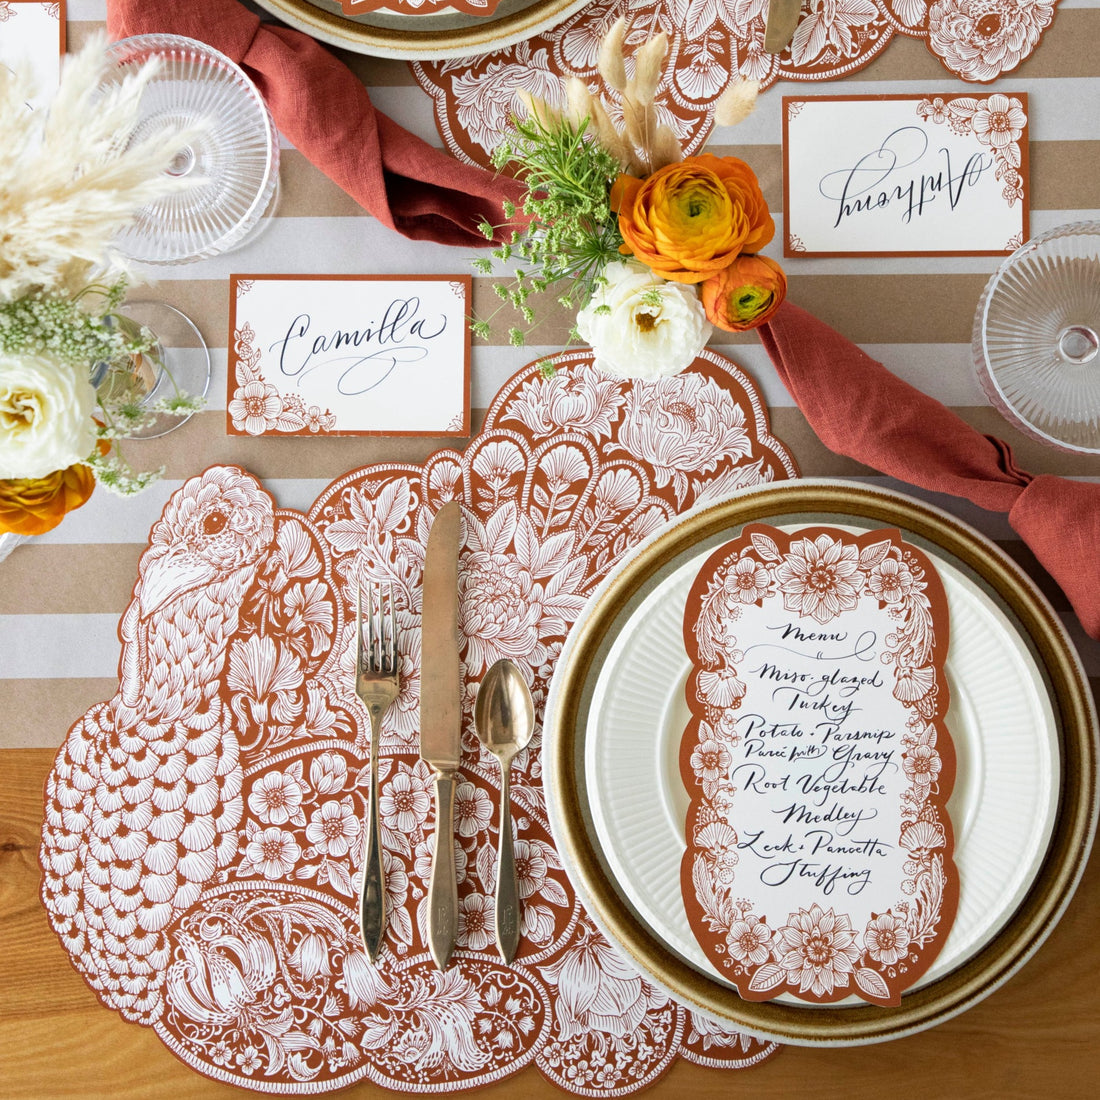 The Die-cut Harvest Turkey Placemat under an elegant Thanksgiving table setting, from above.